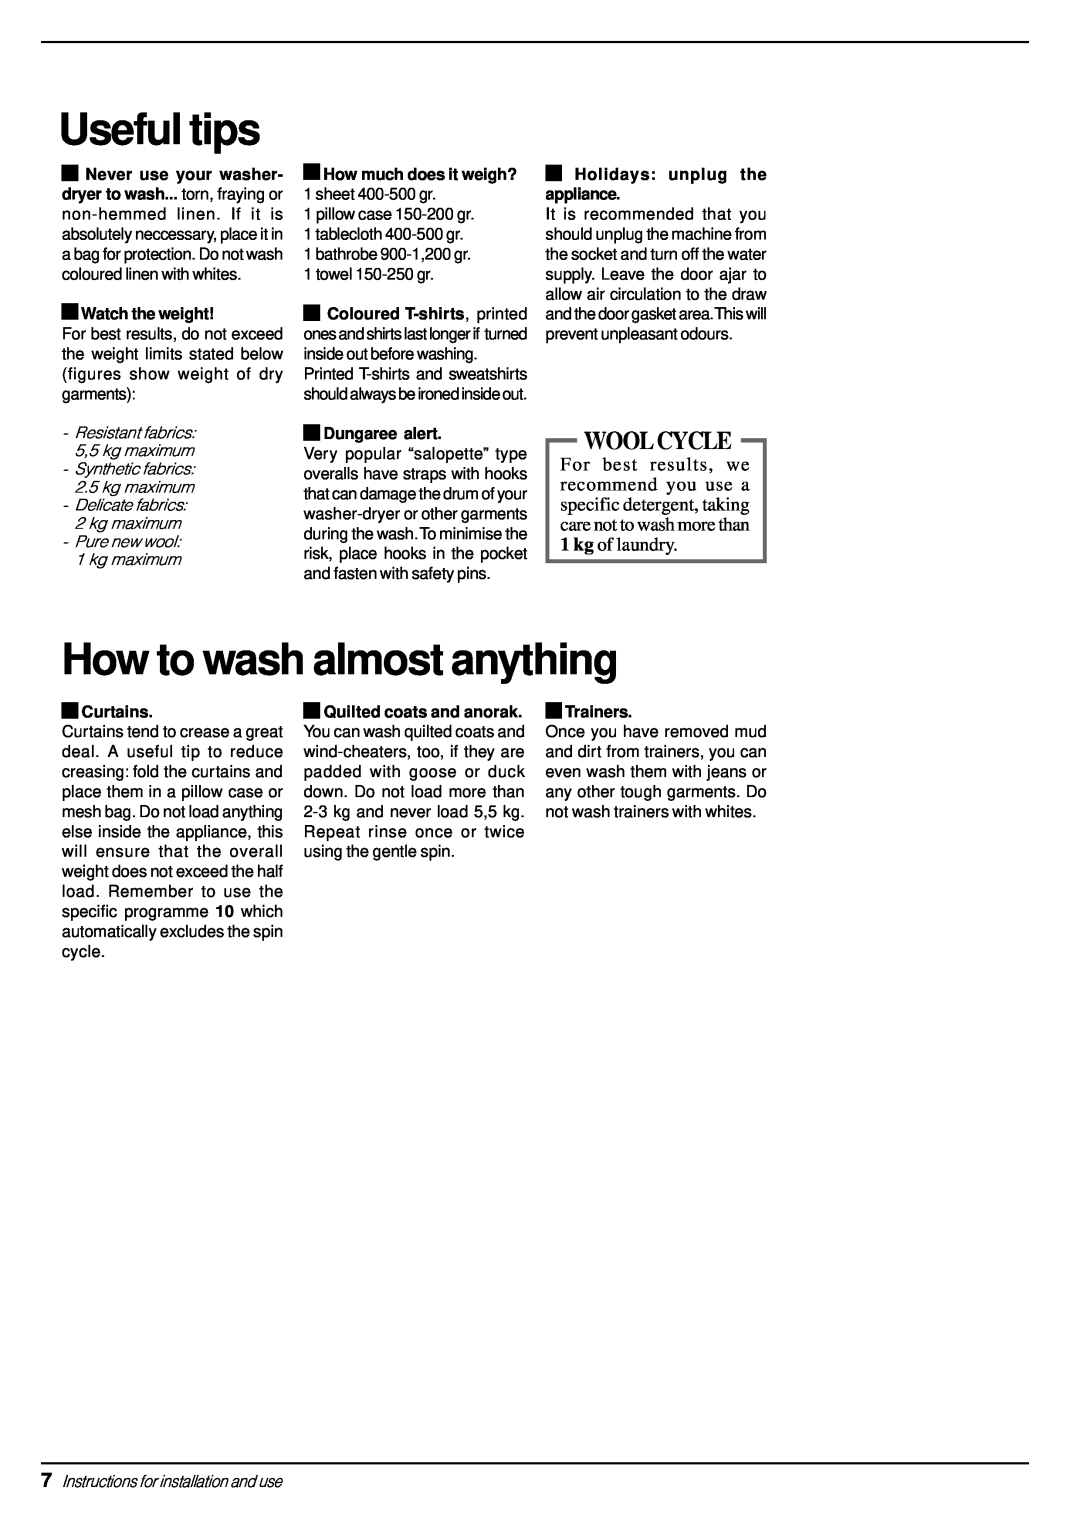 Indesit WD 12 X Useful tips, How to wash almost anything, Wool Cycle, Instructions for installation and use, Curtains 